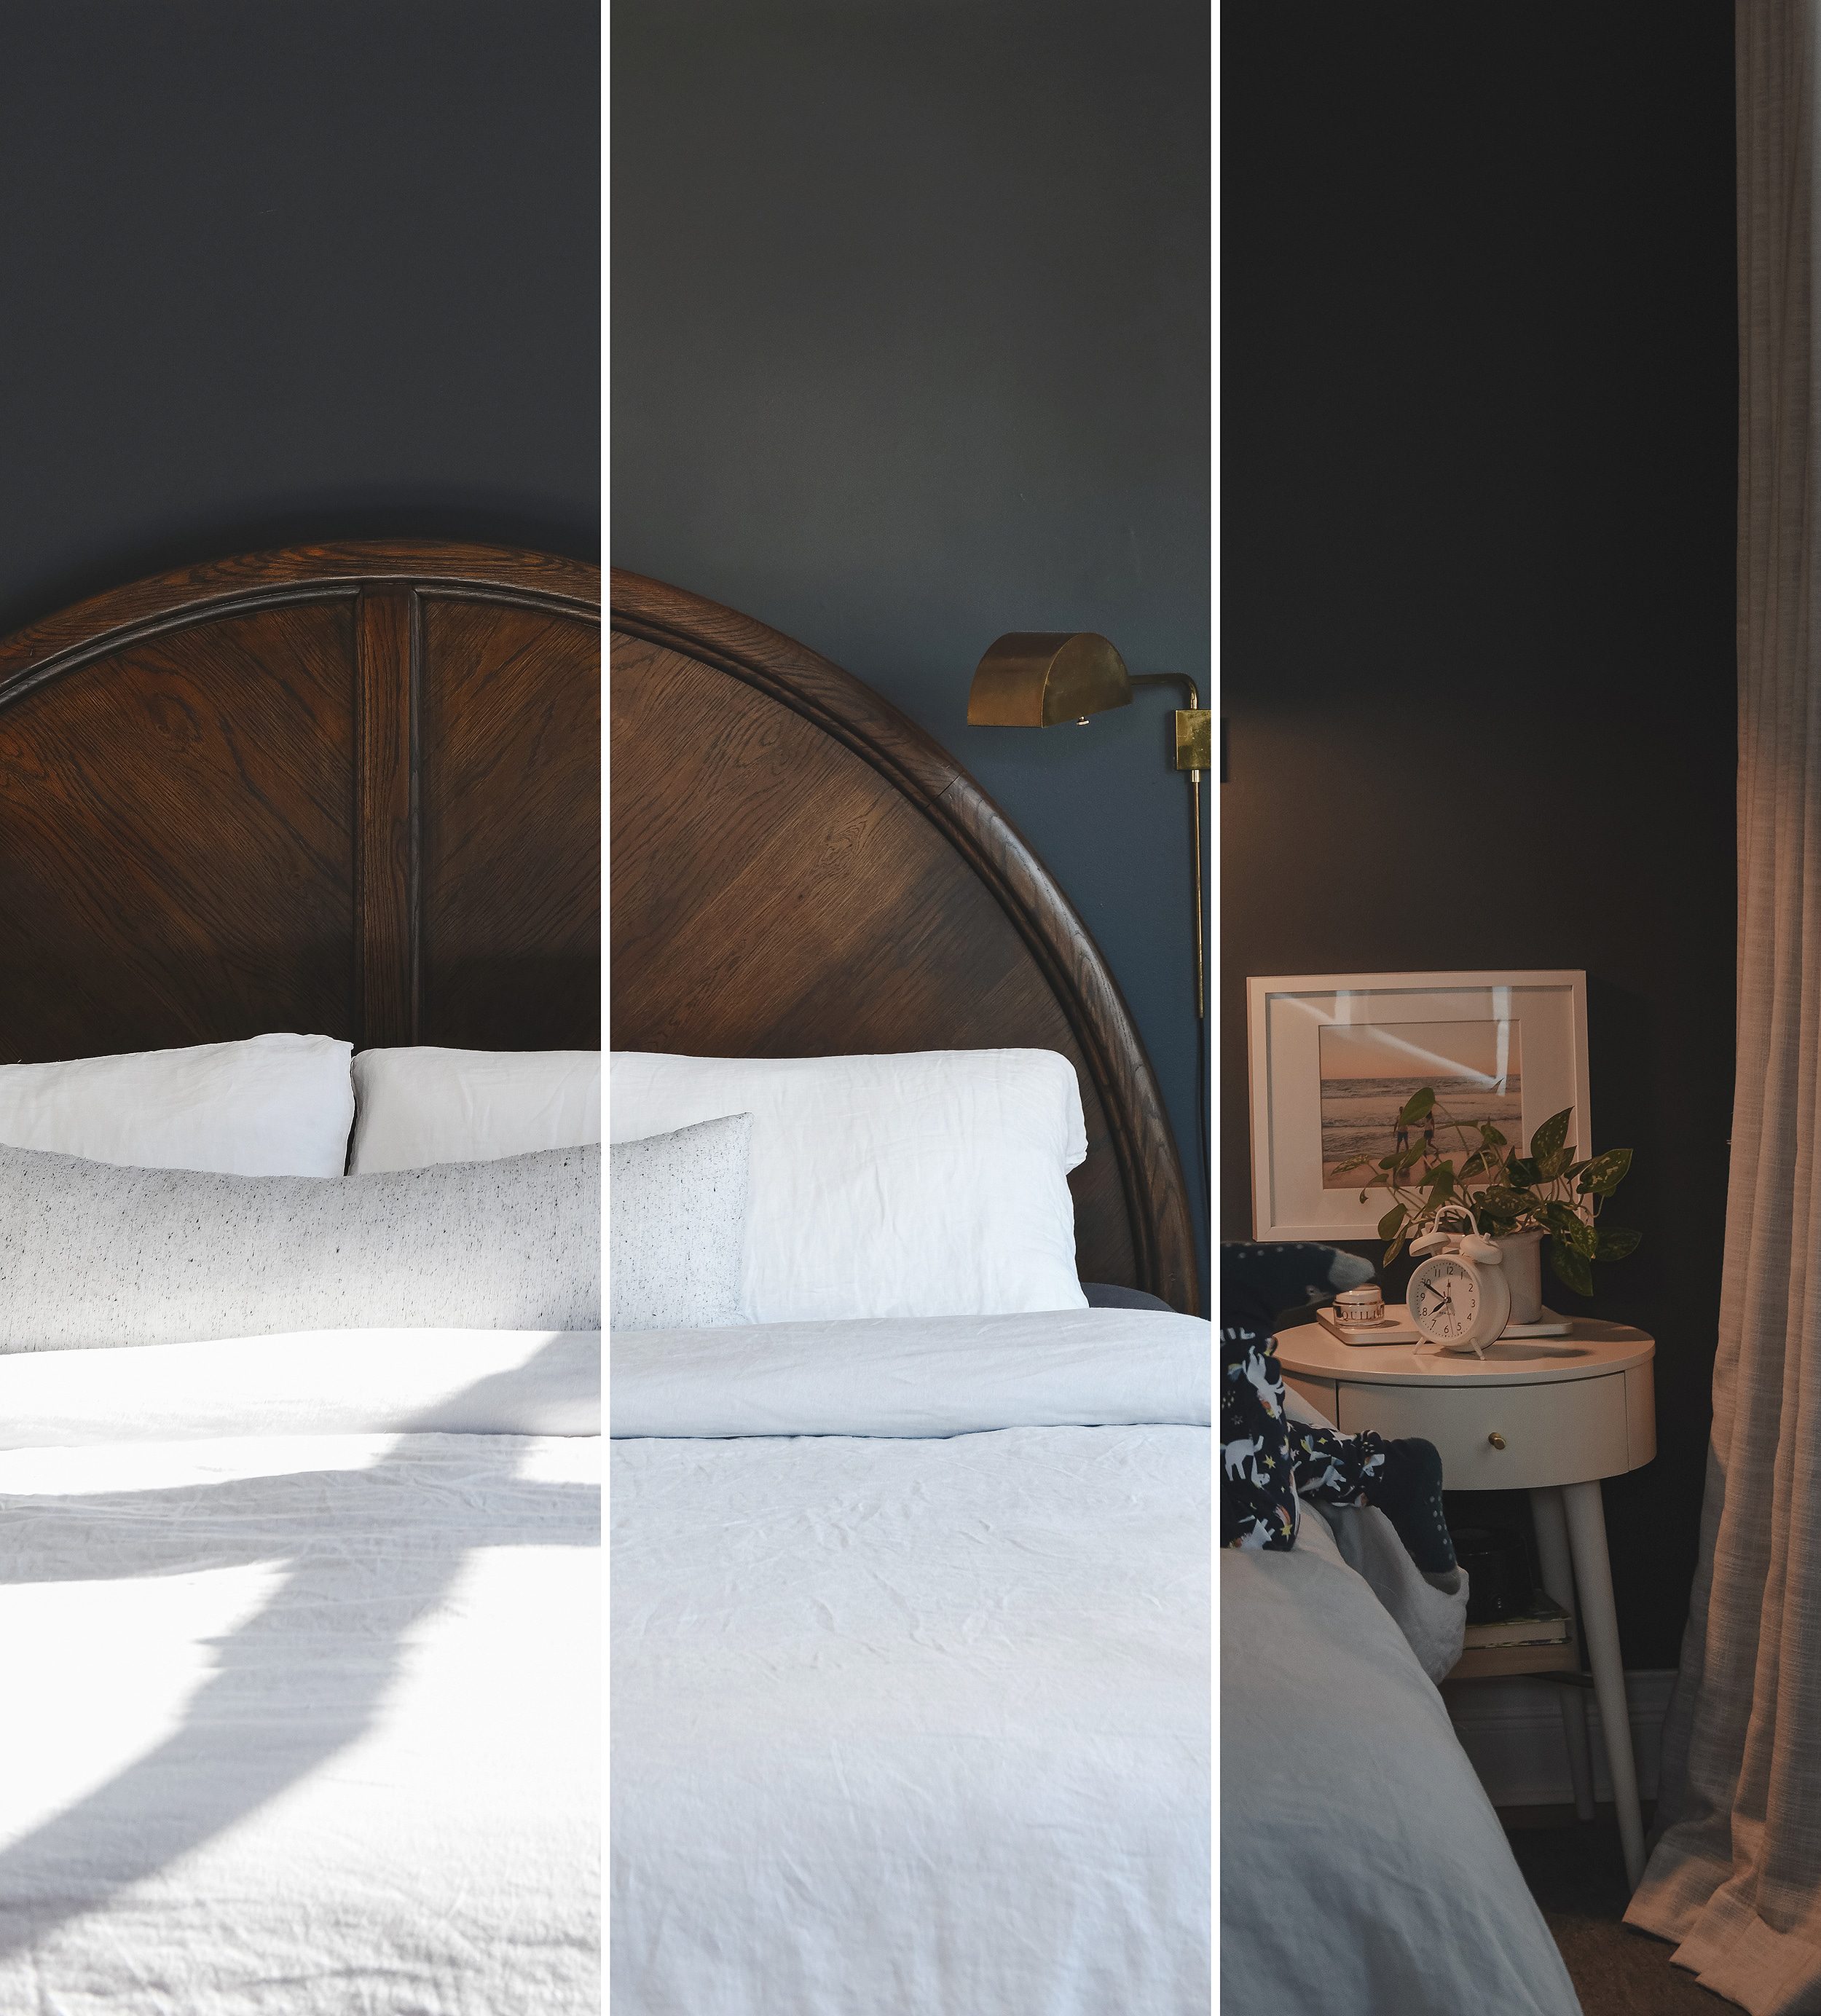 Benjamin Moore Raccon Fur in our primary bedroom at different times of day | via Yellow Brick Home